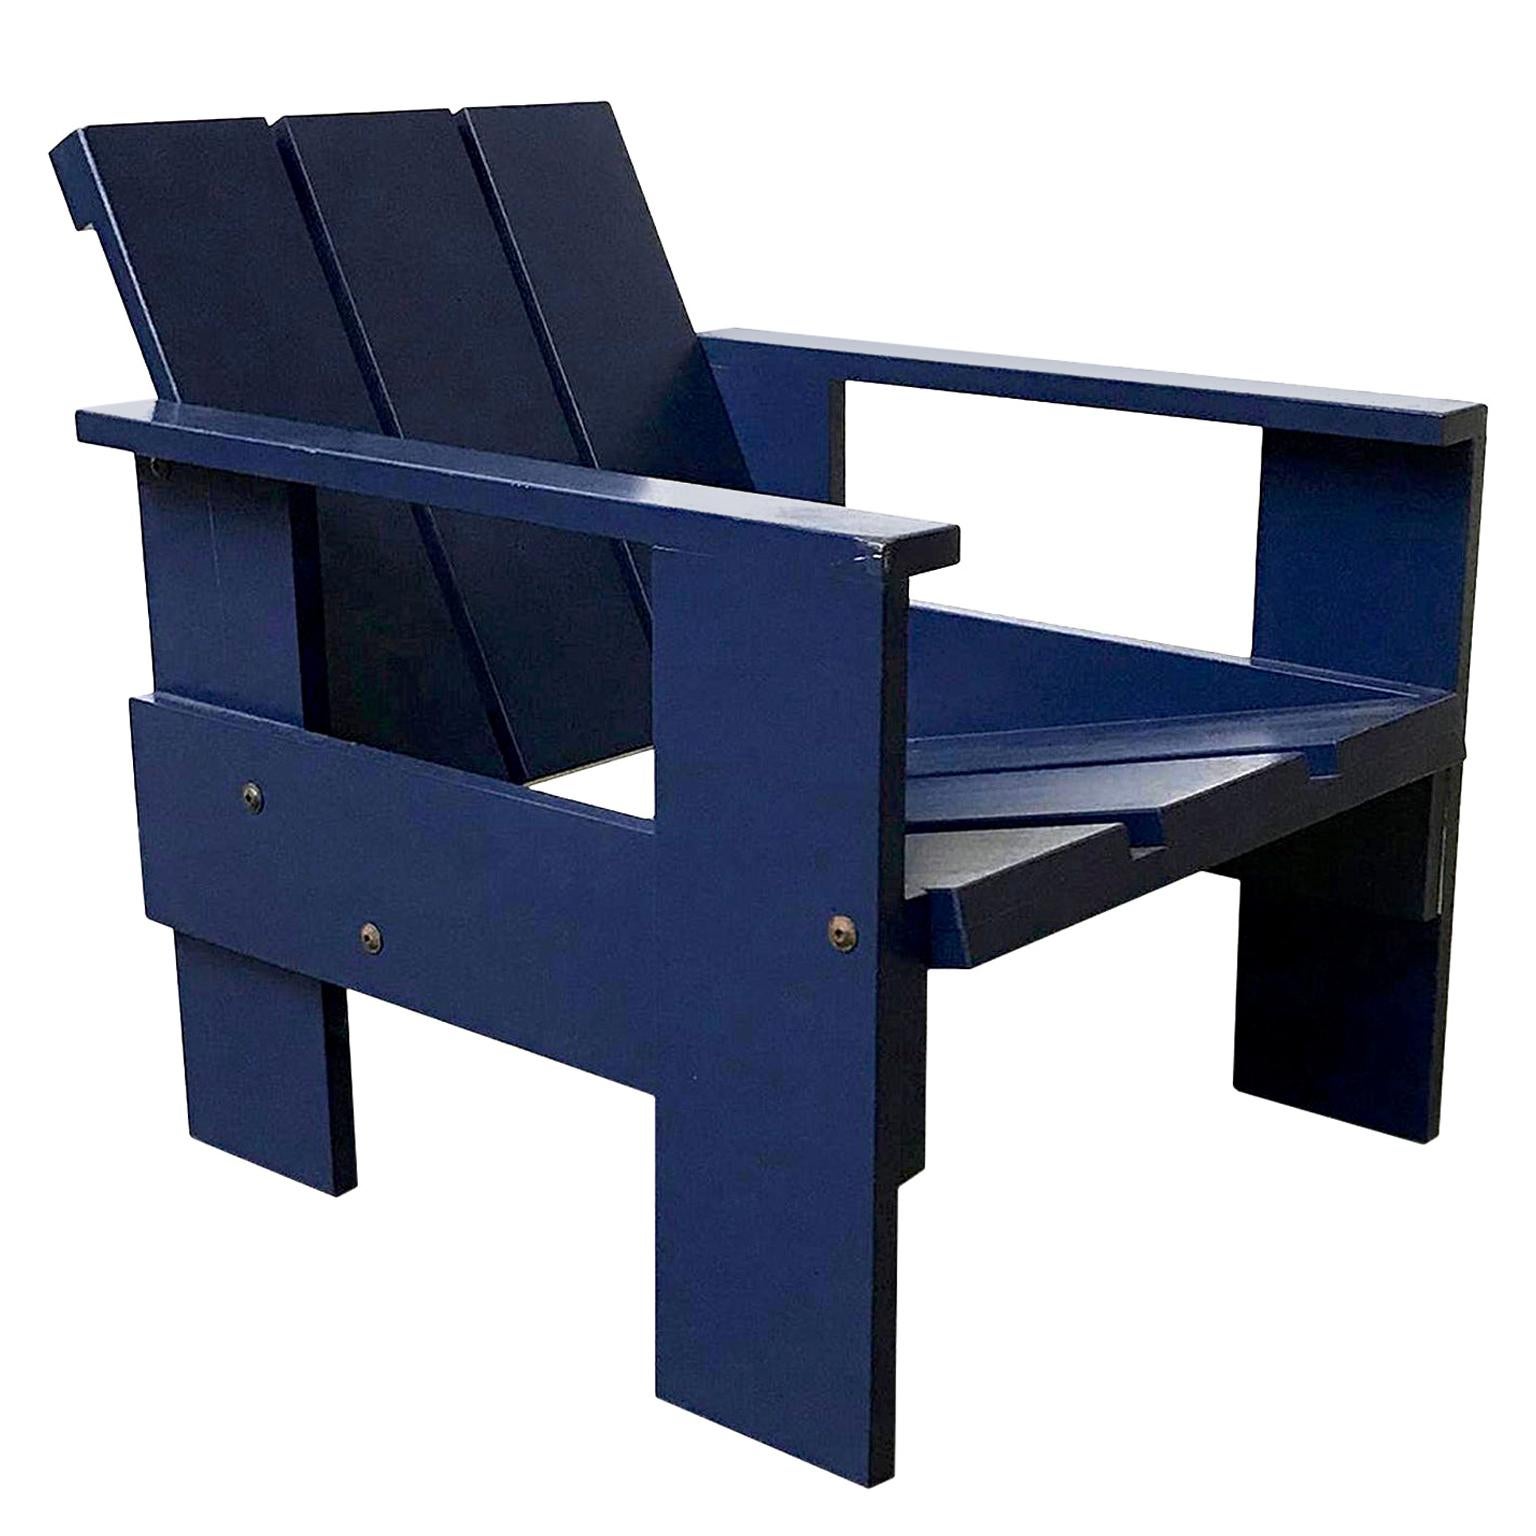 1934, Gerrit Rietveld, by Rietveld Family, Number 41, Children Crate Chair Blue